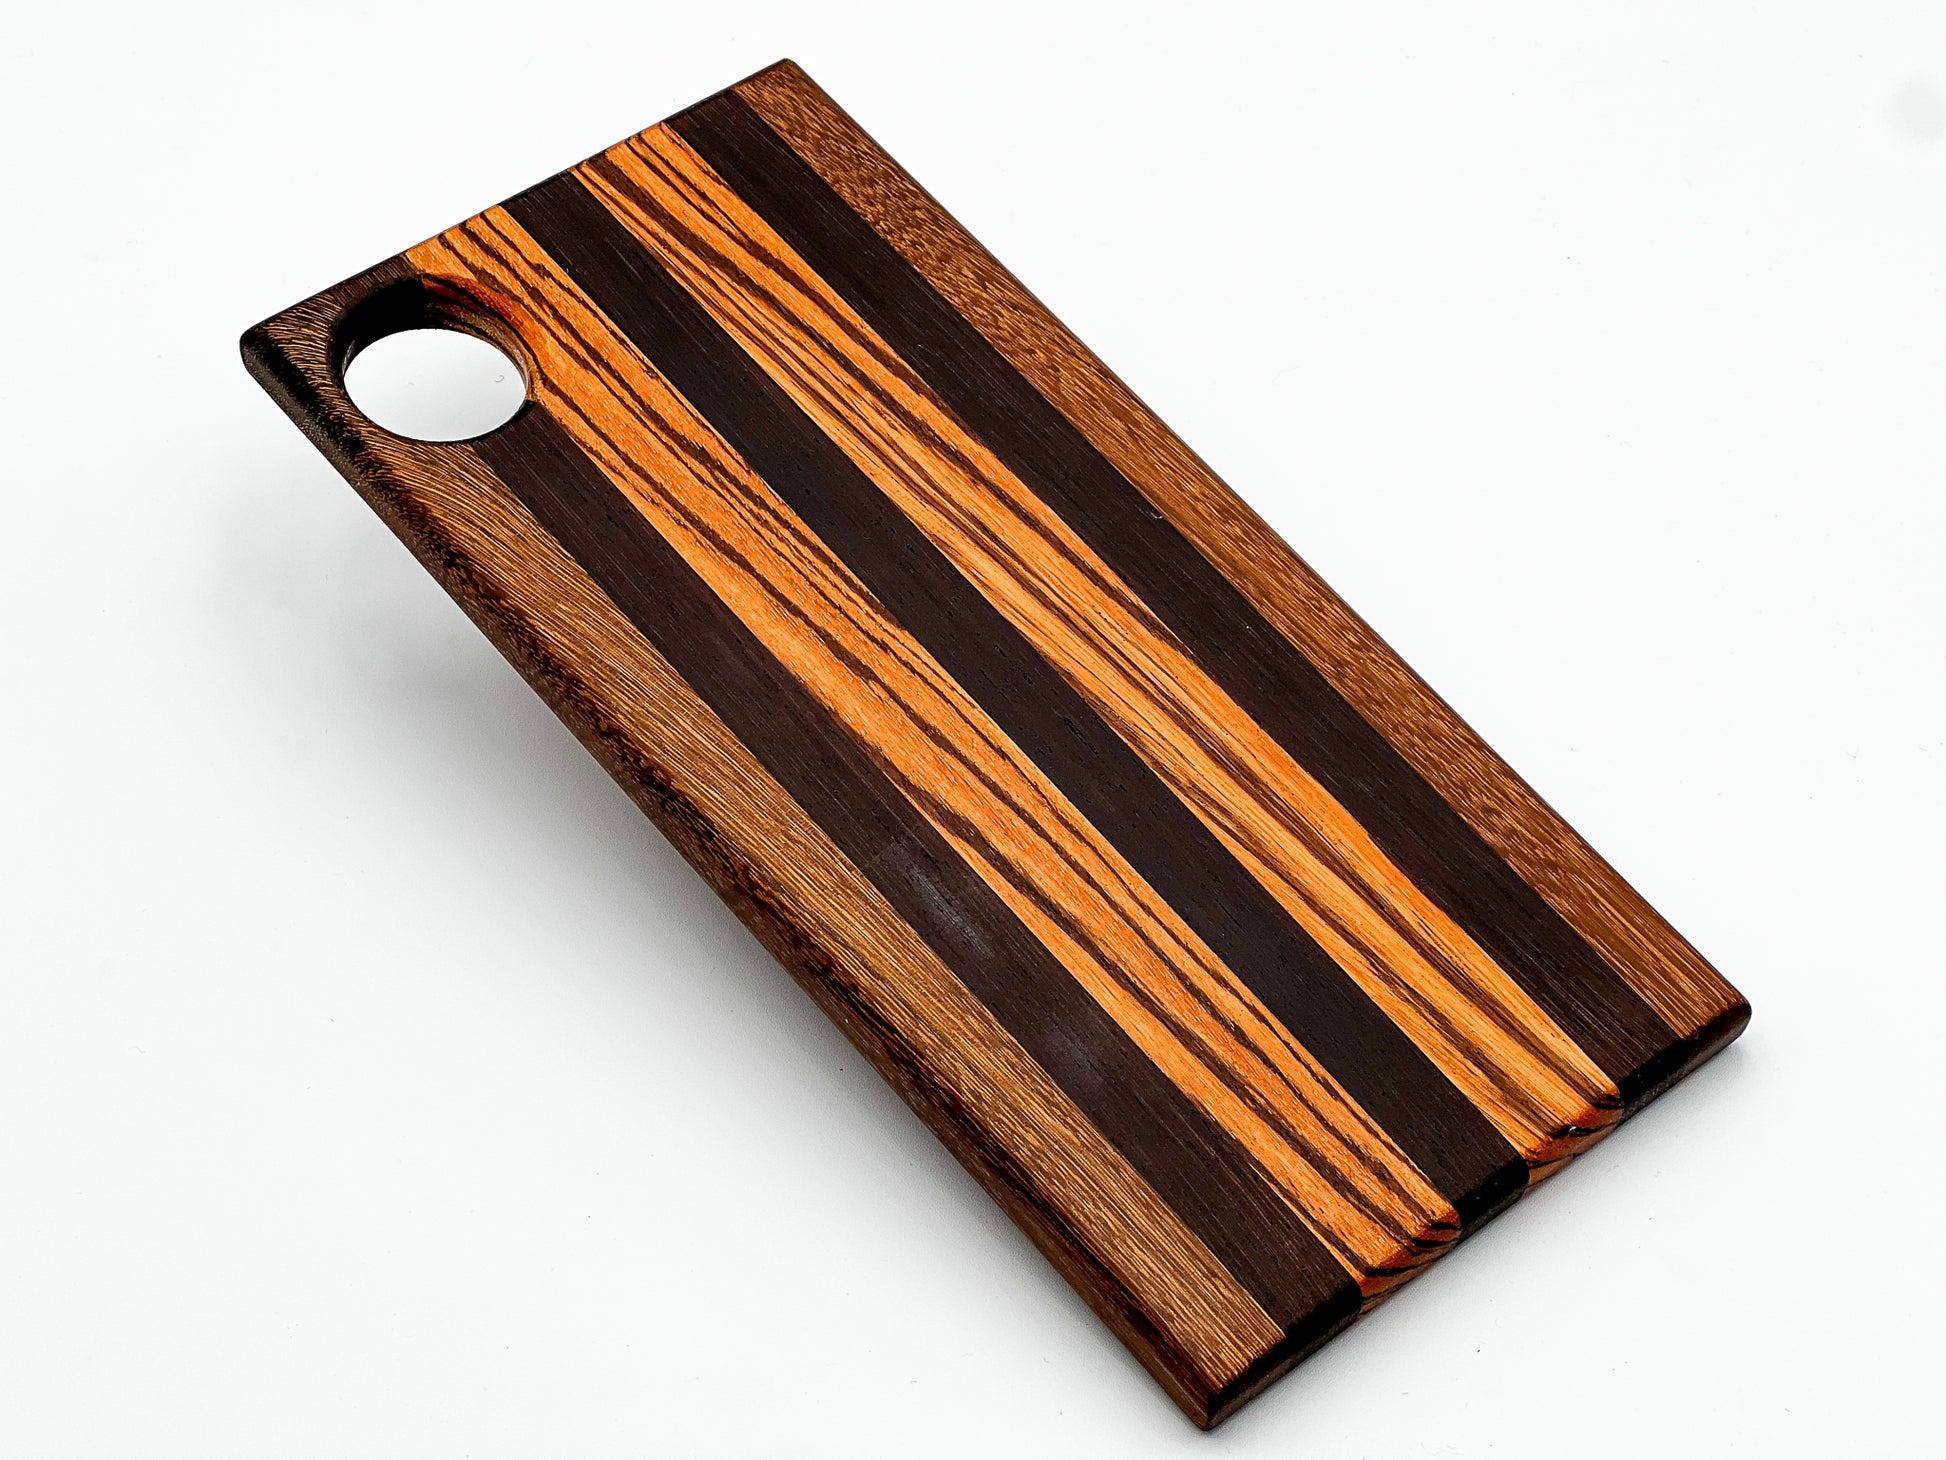 Hardwood/Exotic Wood Cutting Boards – Handmade by S&J